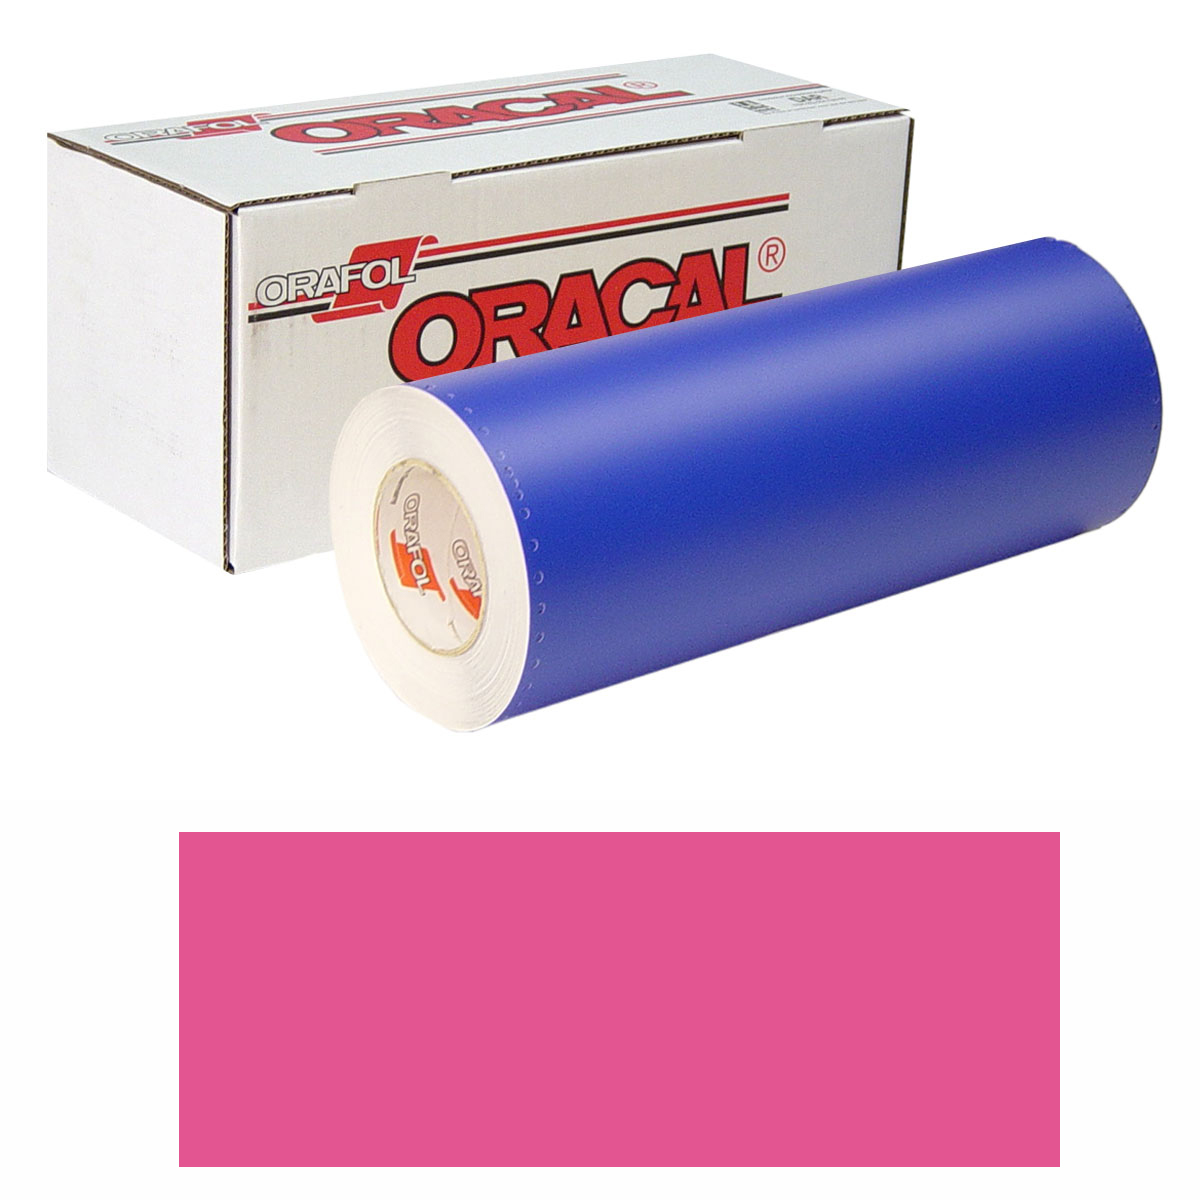 ORACAL 8300 15in X 10yd 041 Pink